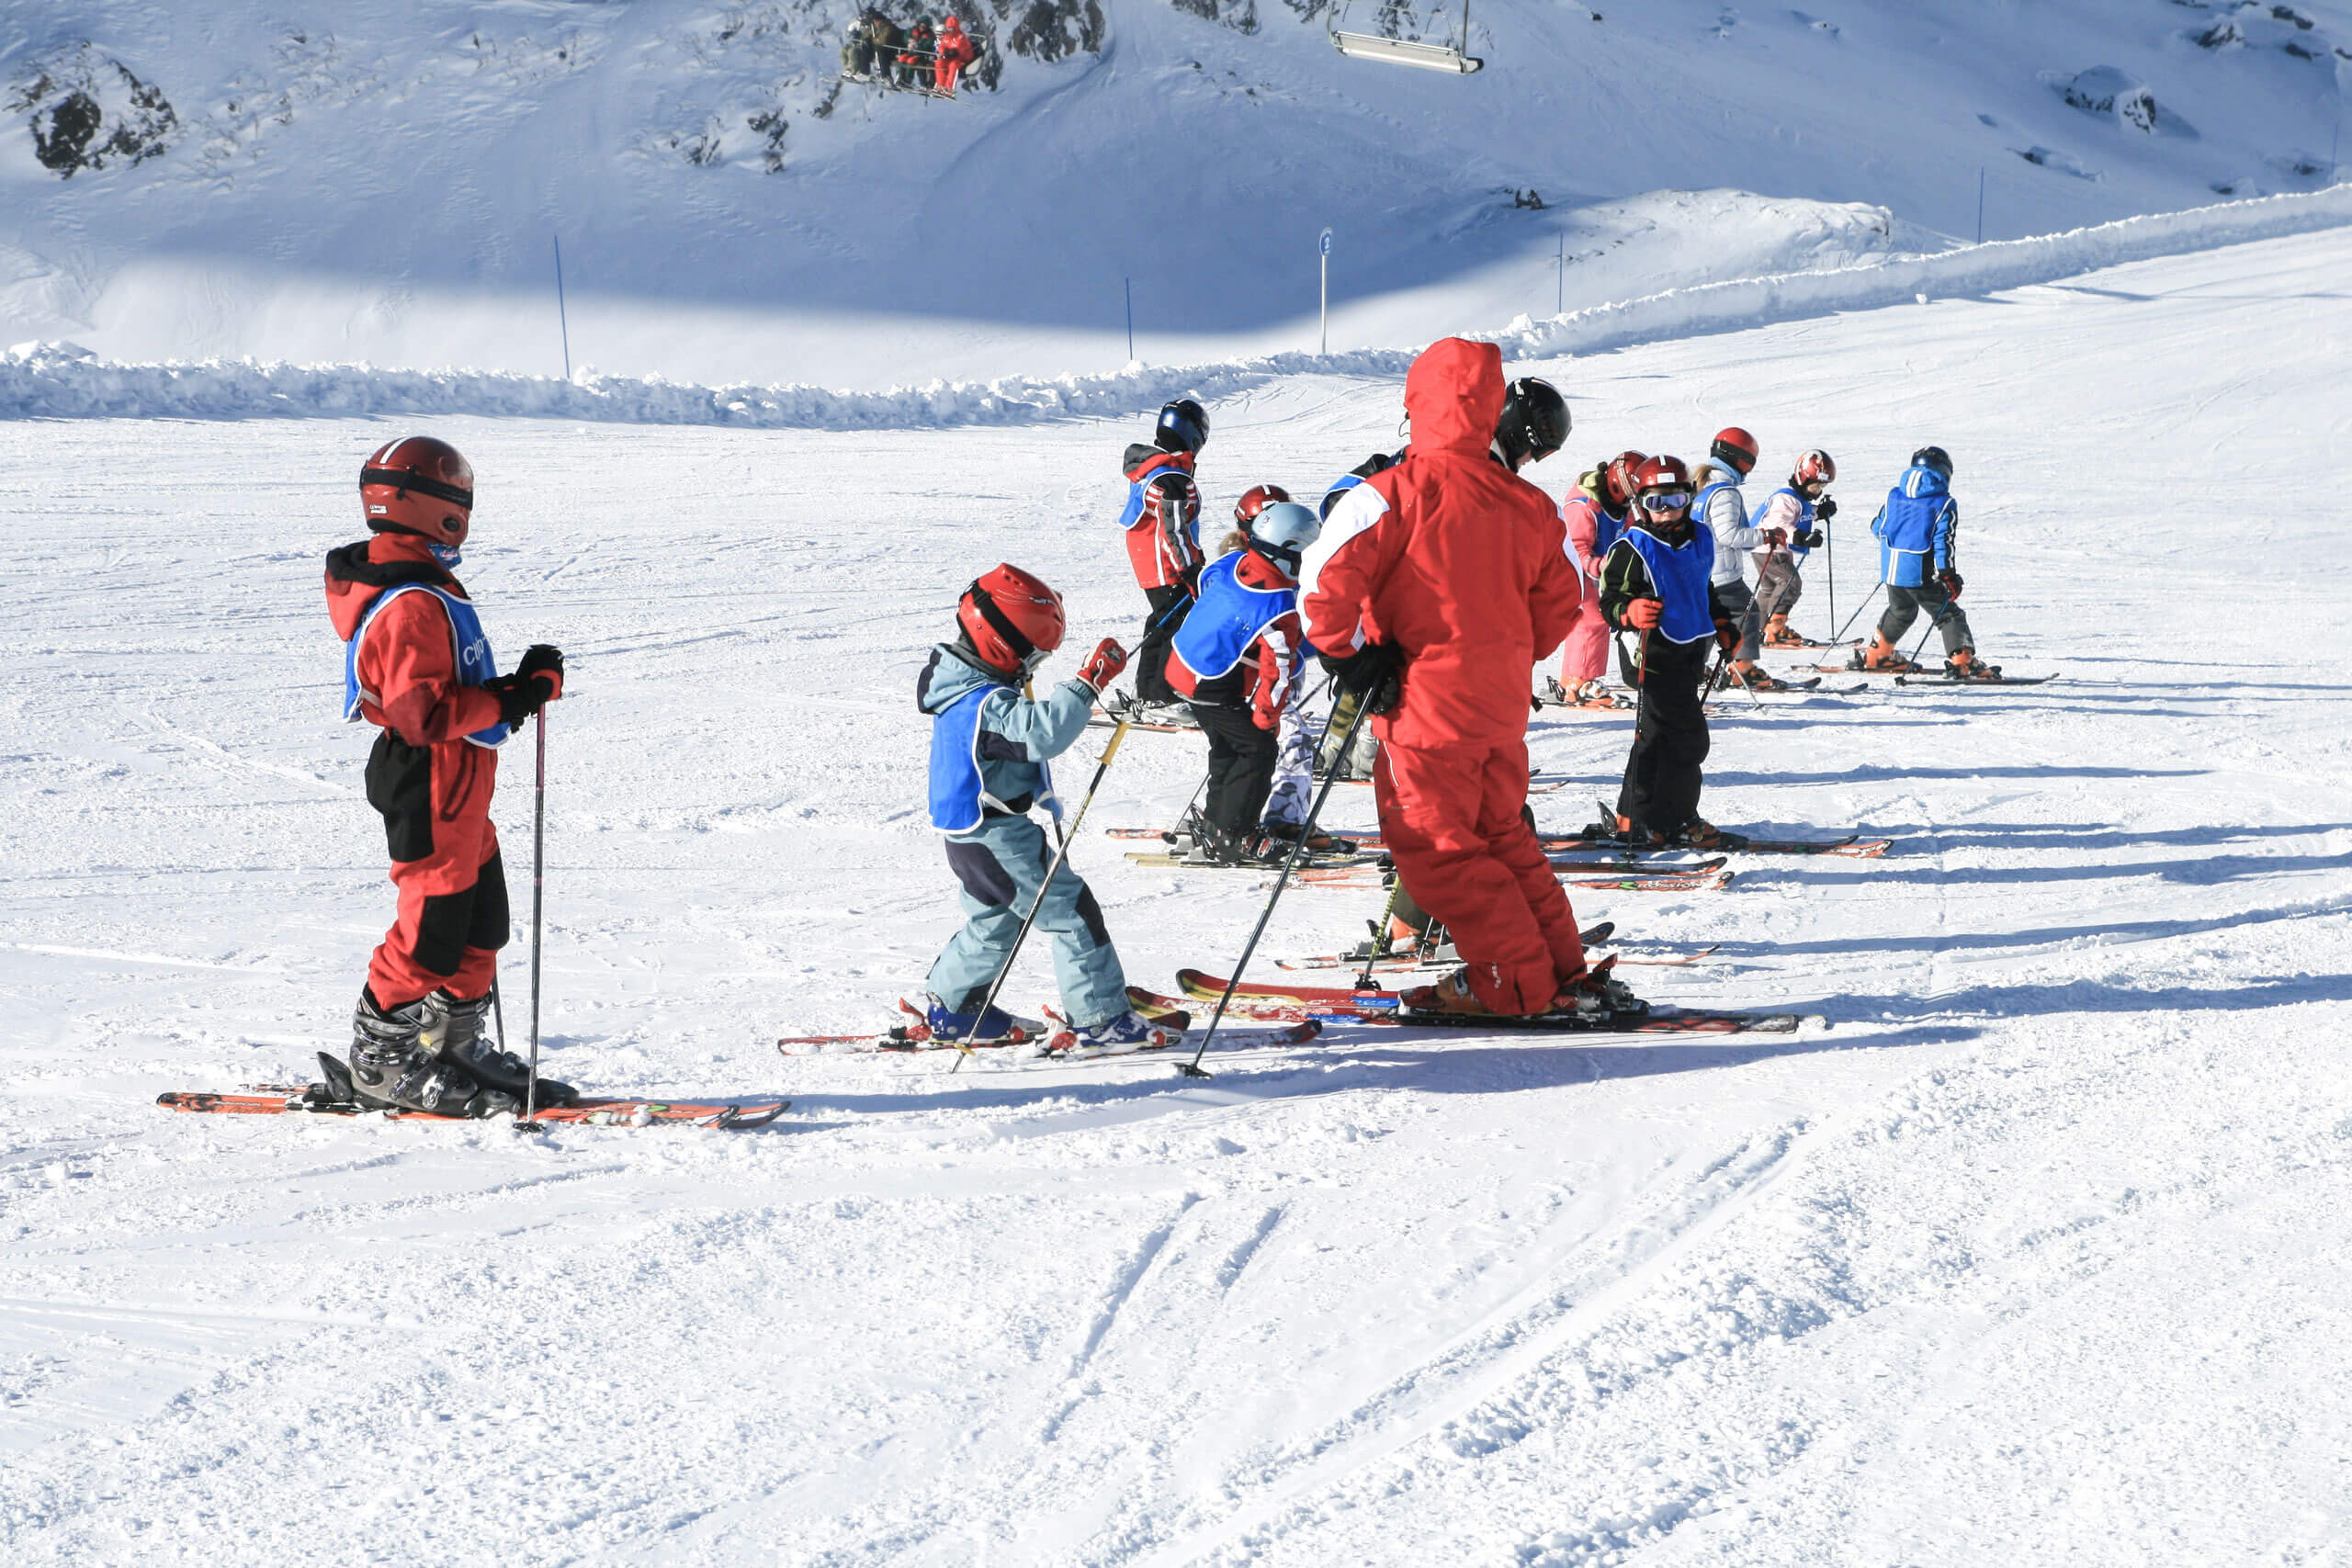 A group of people skiing on the snow in Skischule Erste Schritte auf den Brettern. Children and adul